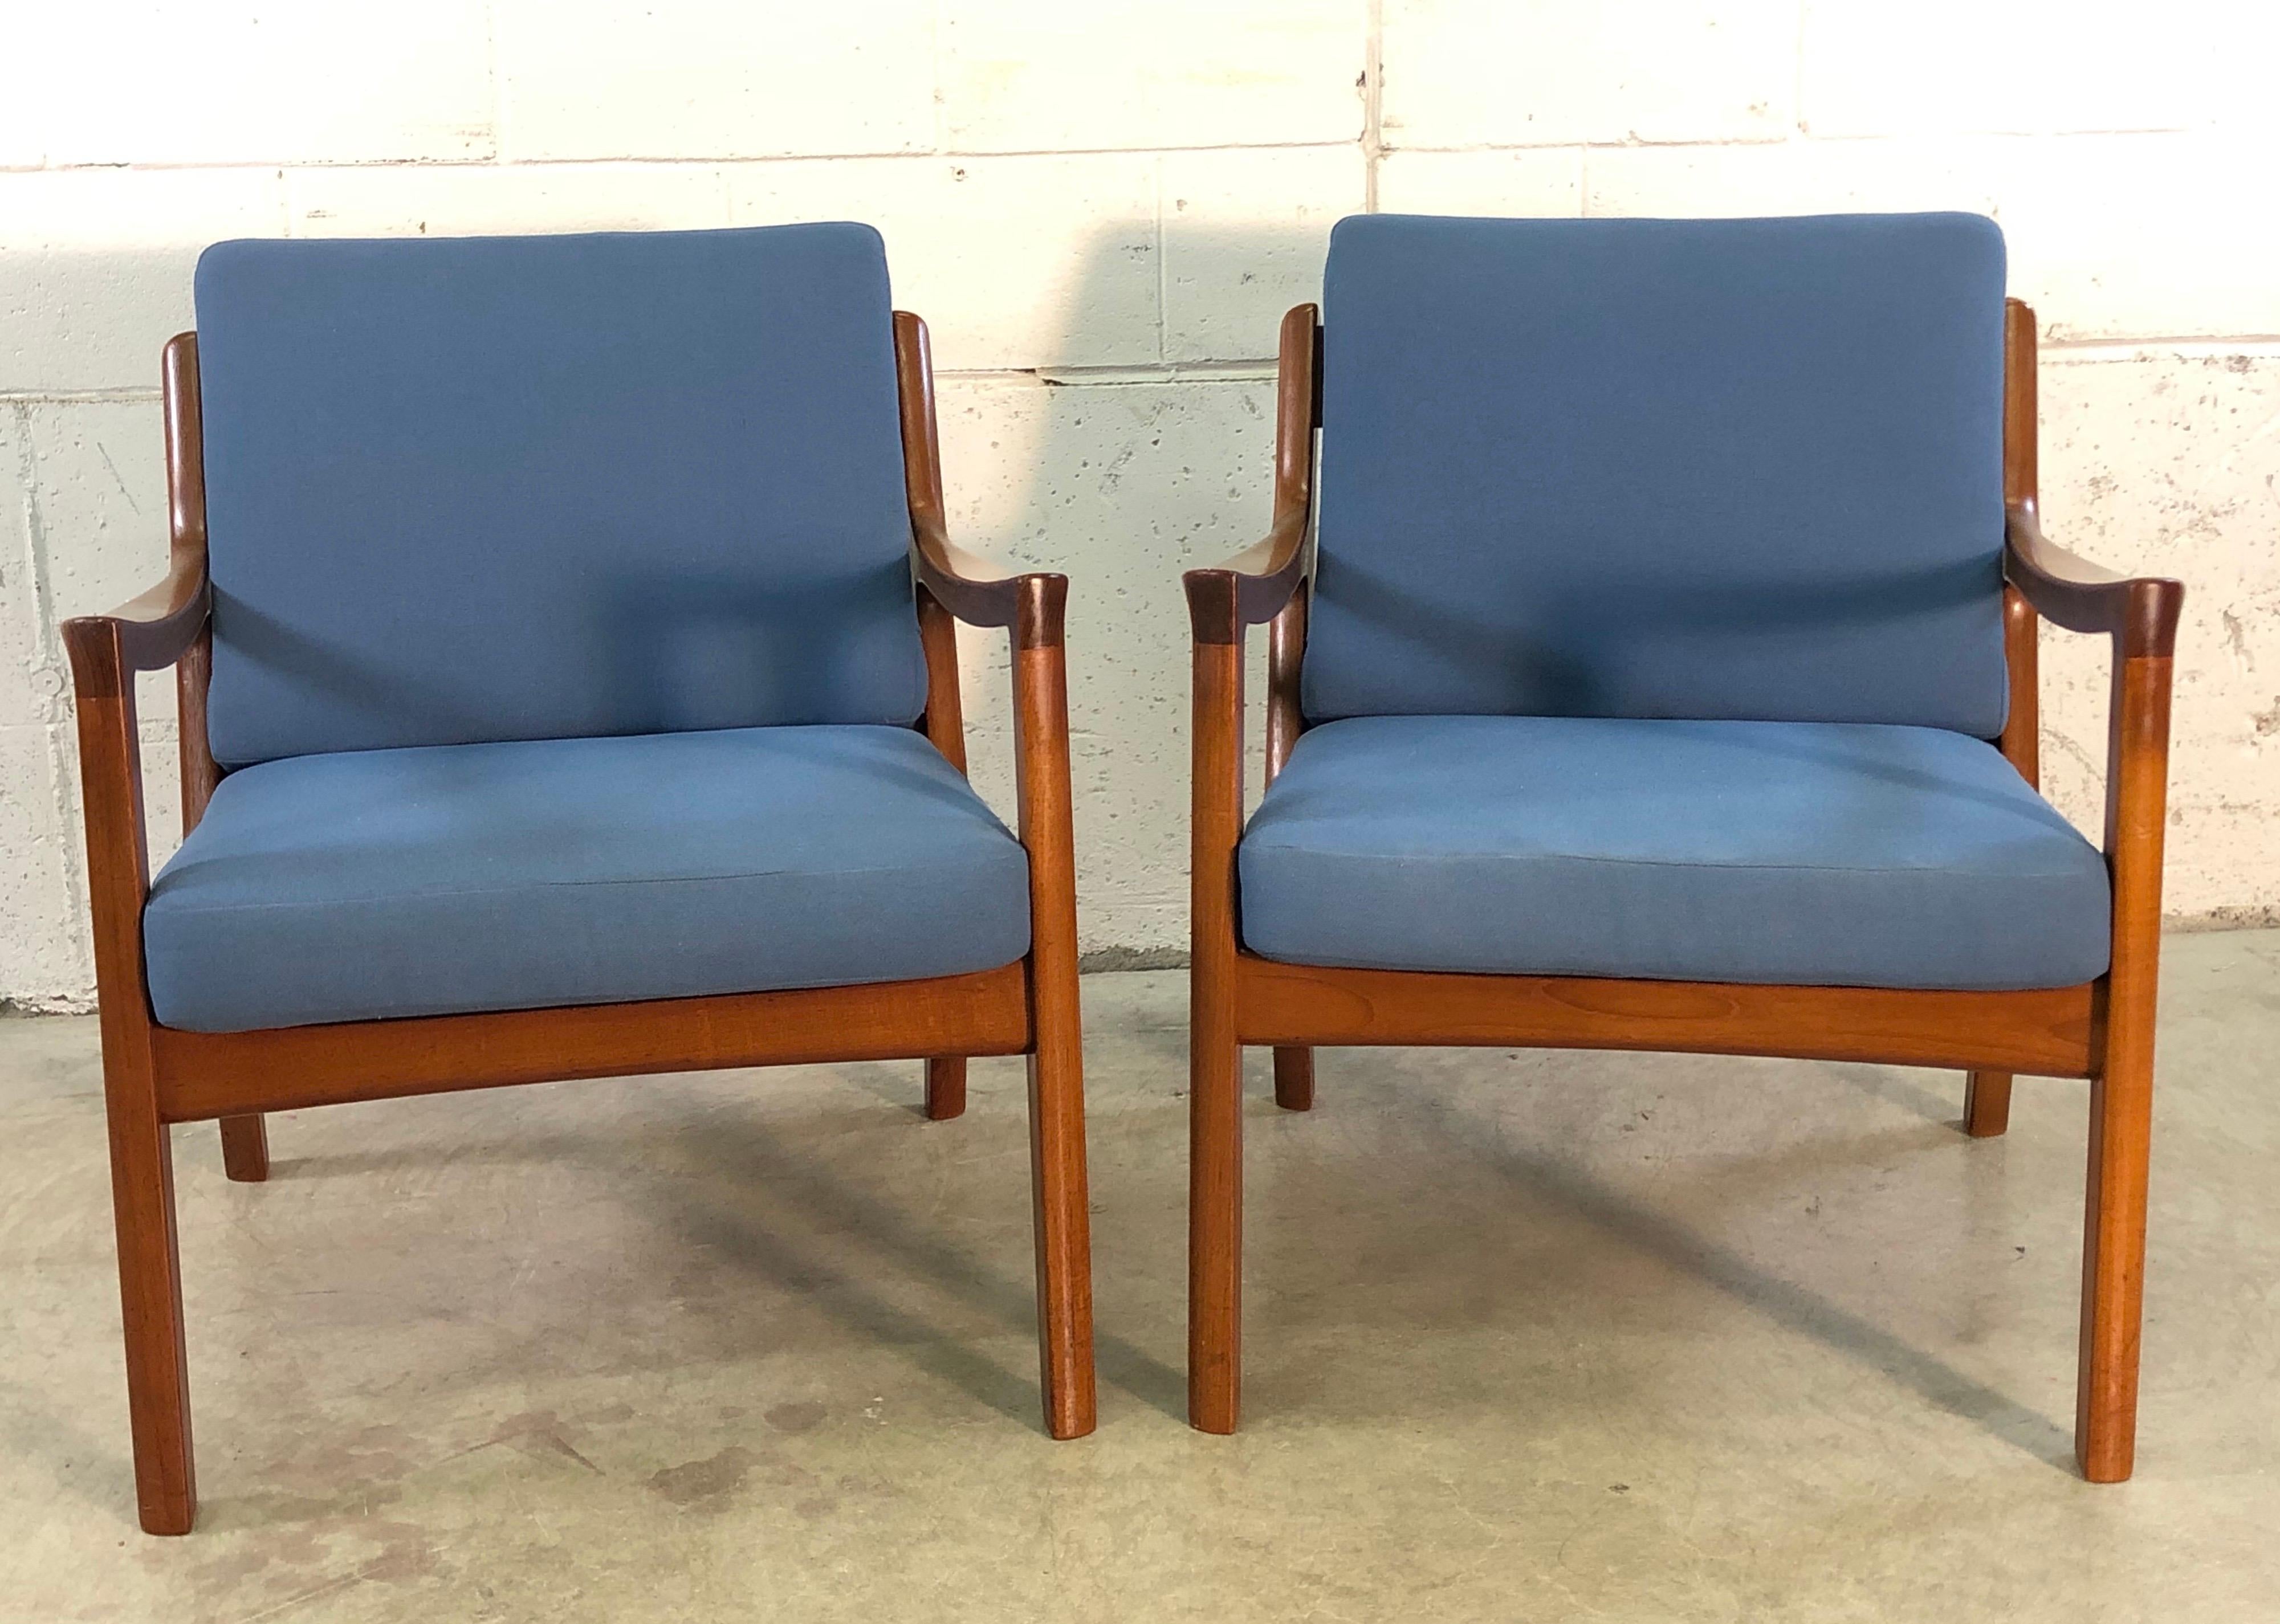 Vintage Danish modern Ole Wanscher for France & Sons Denmark pair of Senator easy chairs in teak. The chairs are in excellent condition, very strong and sturdy. The chairs are comfortable and well designed. Cushion fabric needs replacement. Marked.